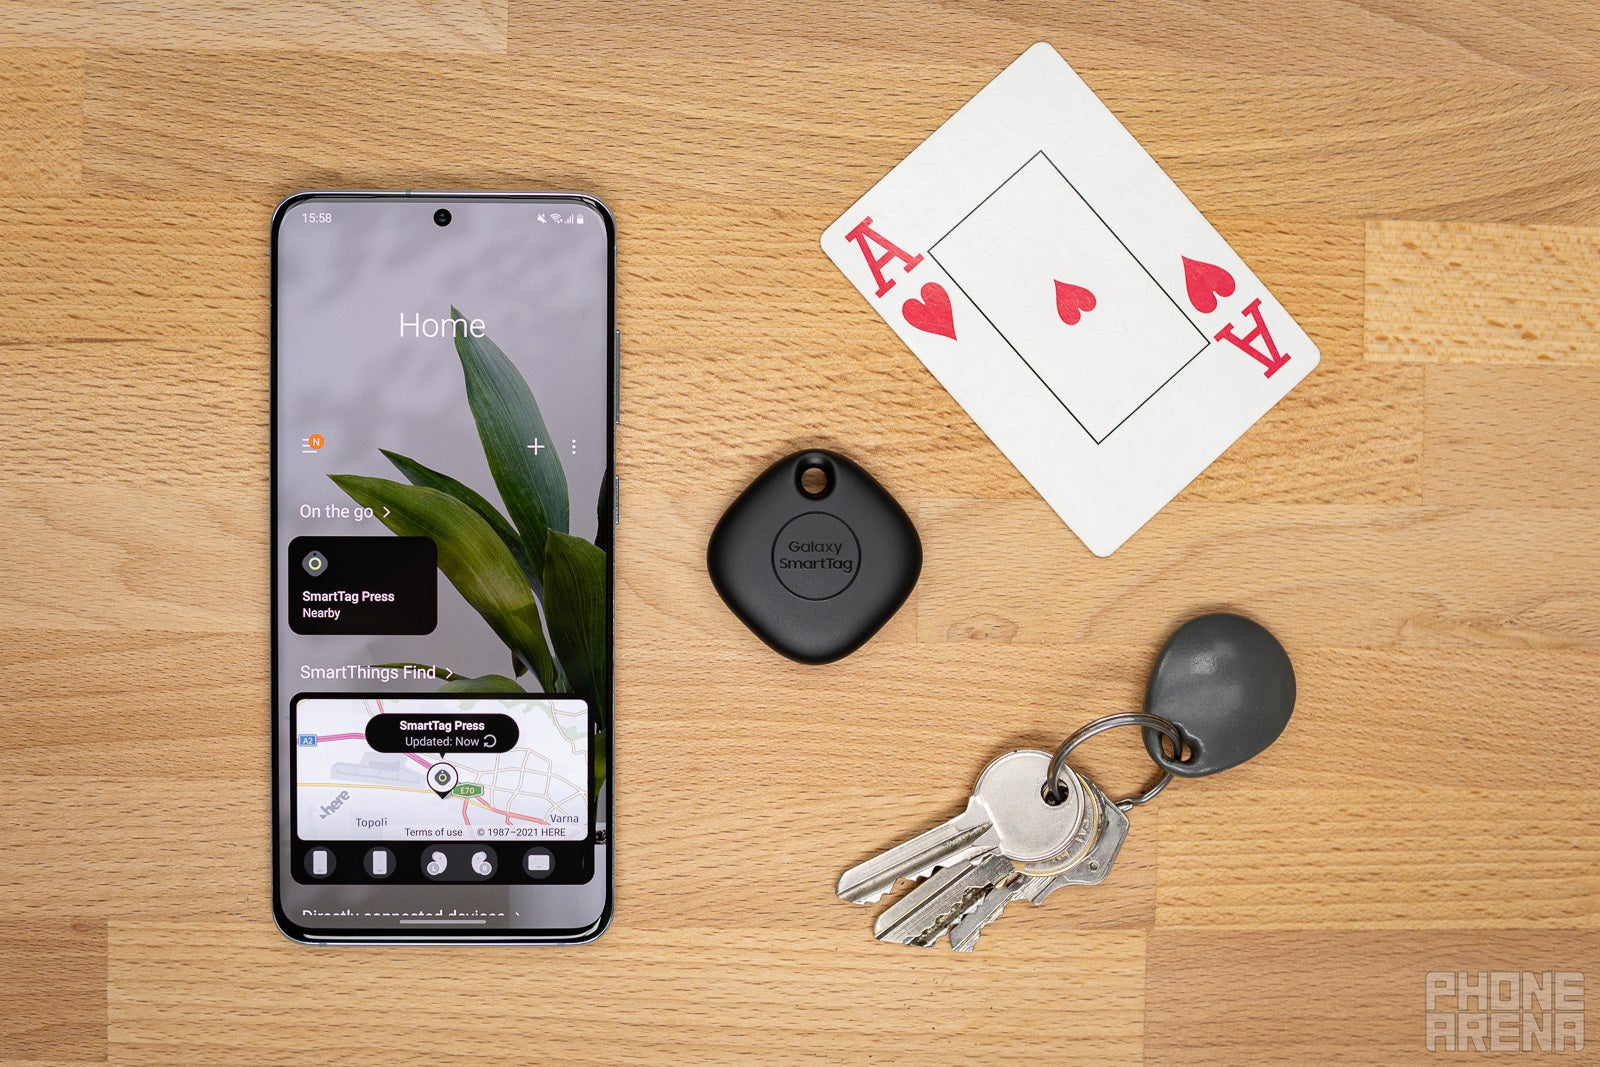 Exclusive] Samsung Galaxy Smart Tag design spotted on SmartThings